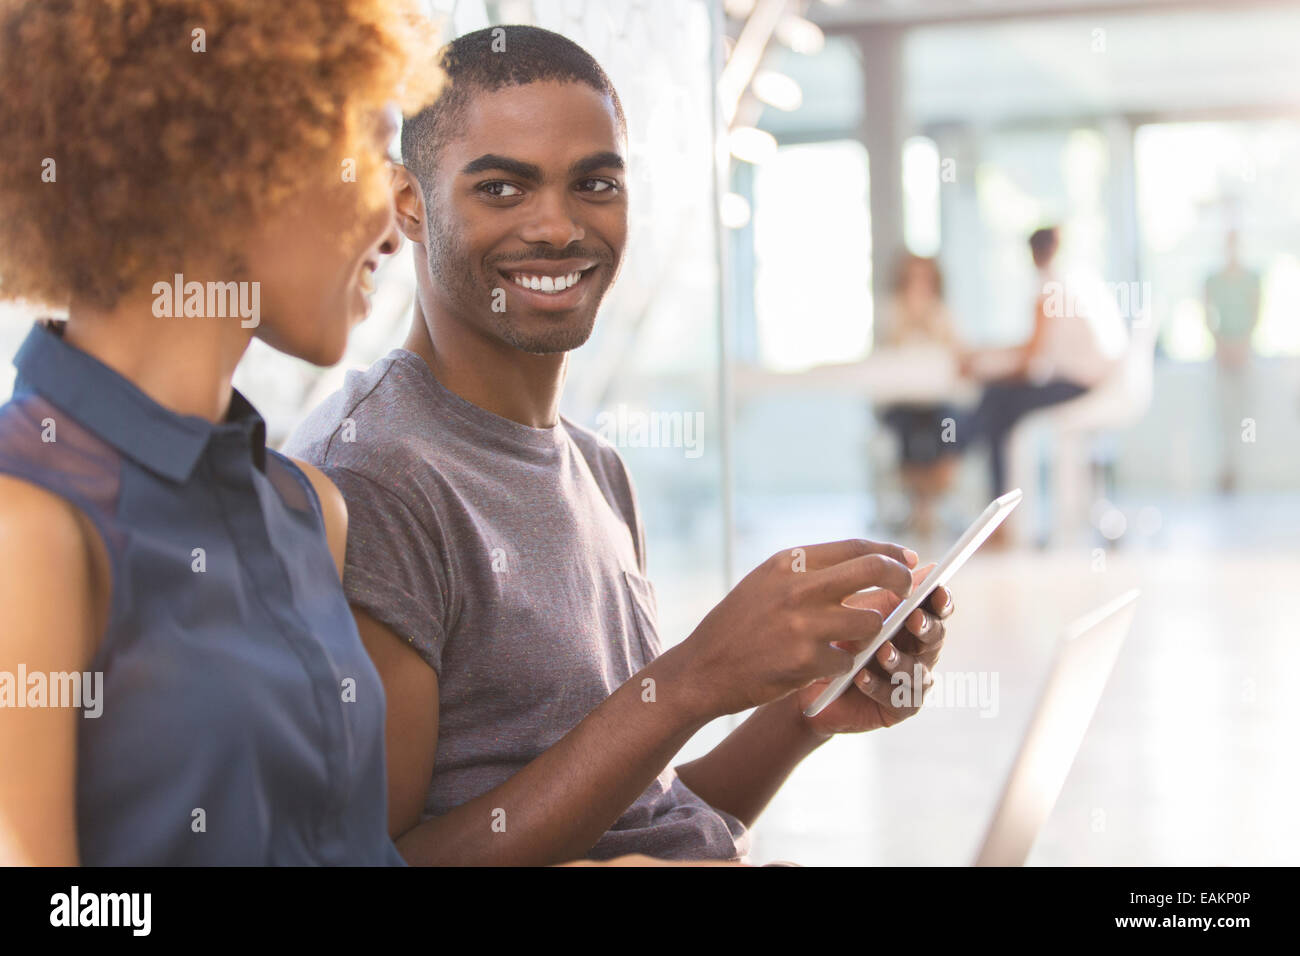 Man and woman using tablet in office, colleagues in background Stock Photo